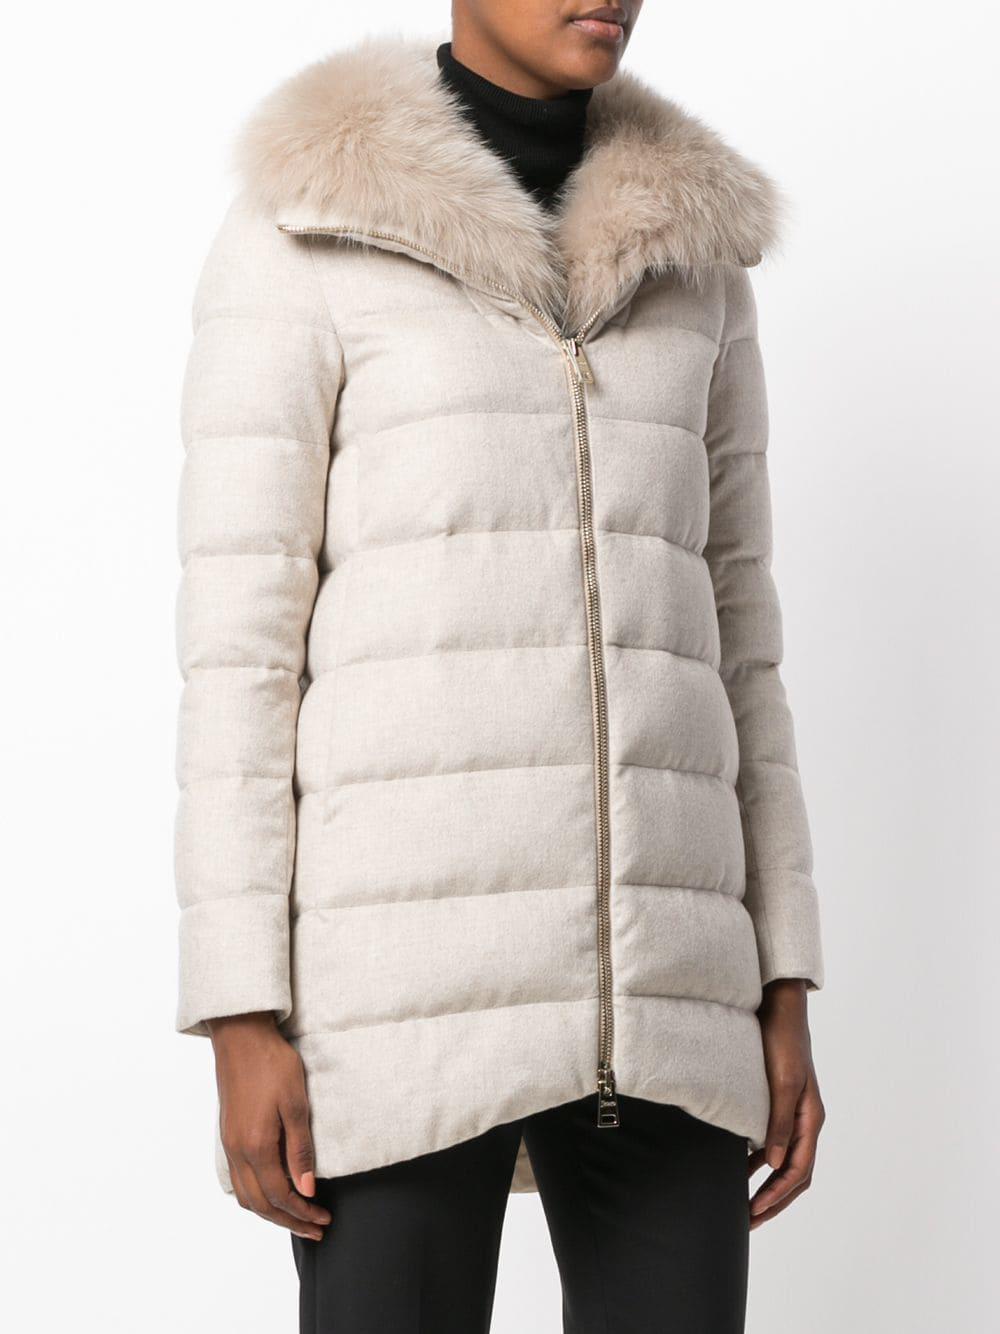 Herno Cashmere Fur Trim Collar Padded Jacket in Natural - Lyst